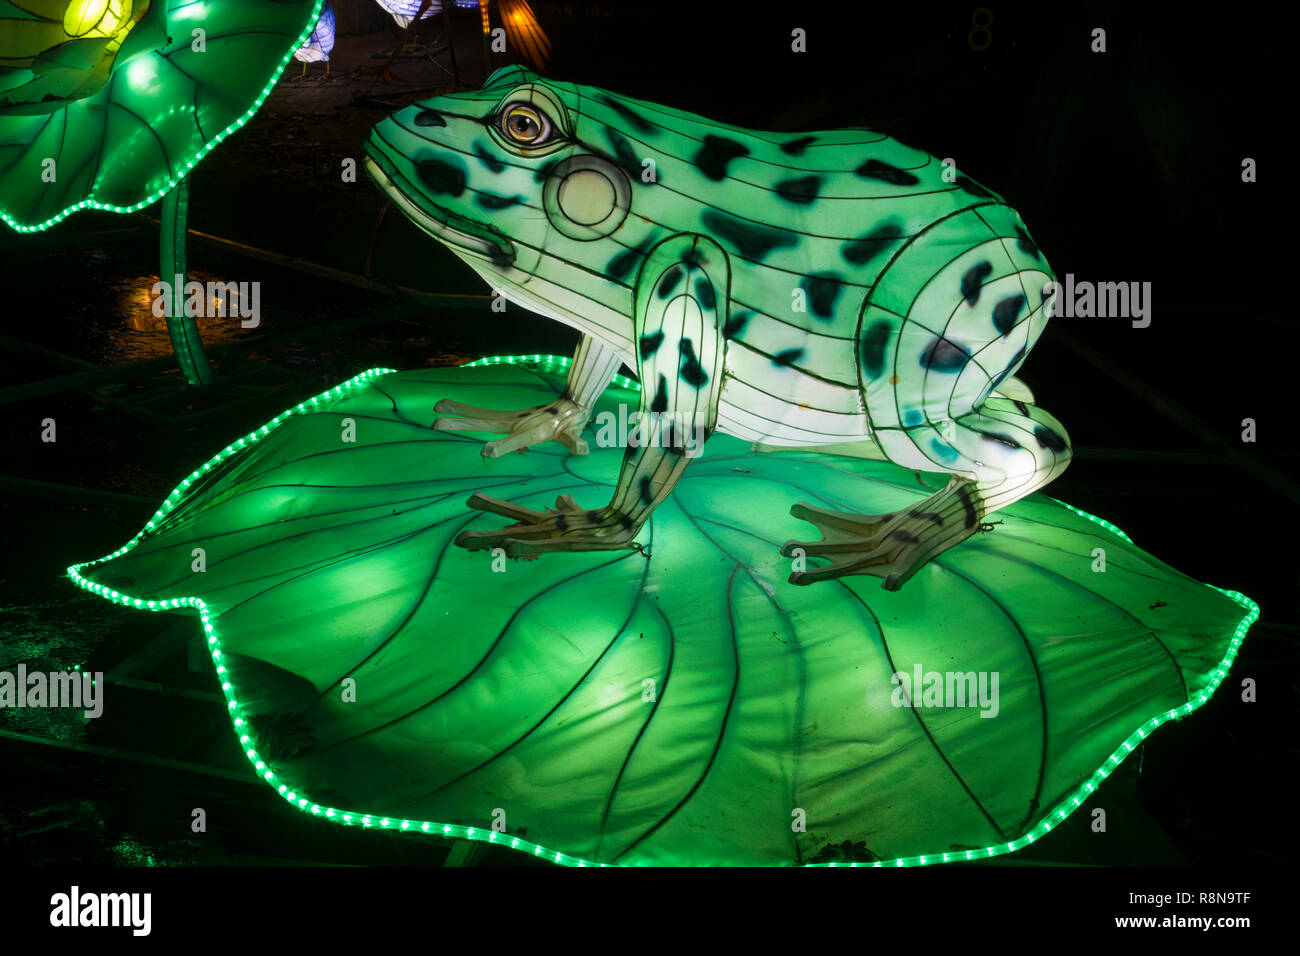 Green frog paper sculpture shining in the dark at a Asian lantern festival. Stock Photo